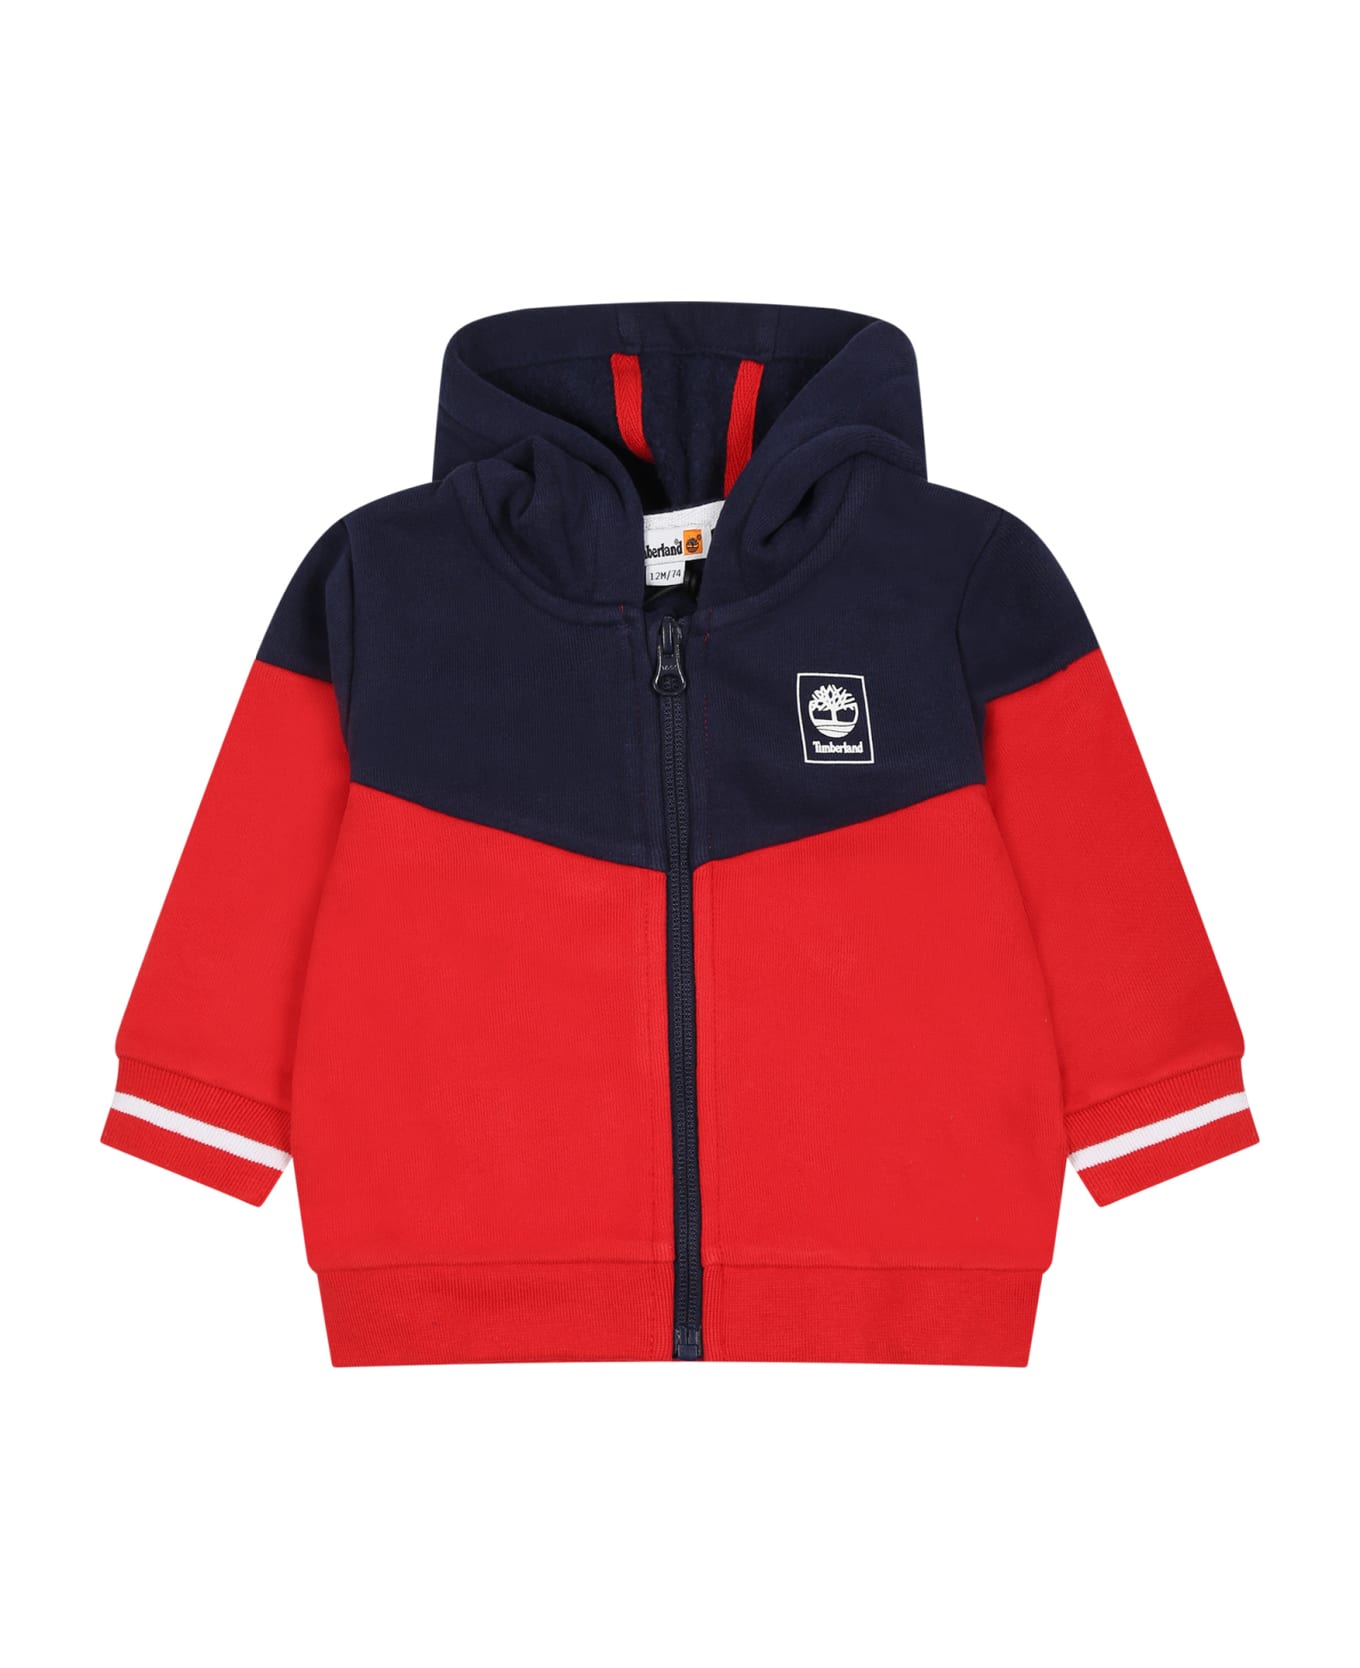 Timberland Red Sweatshirt For Baby Boy With Printed Logo - Red